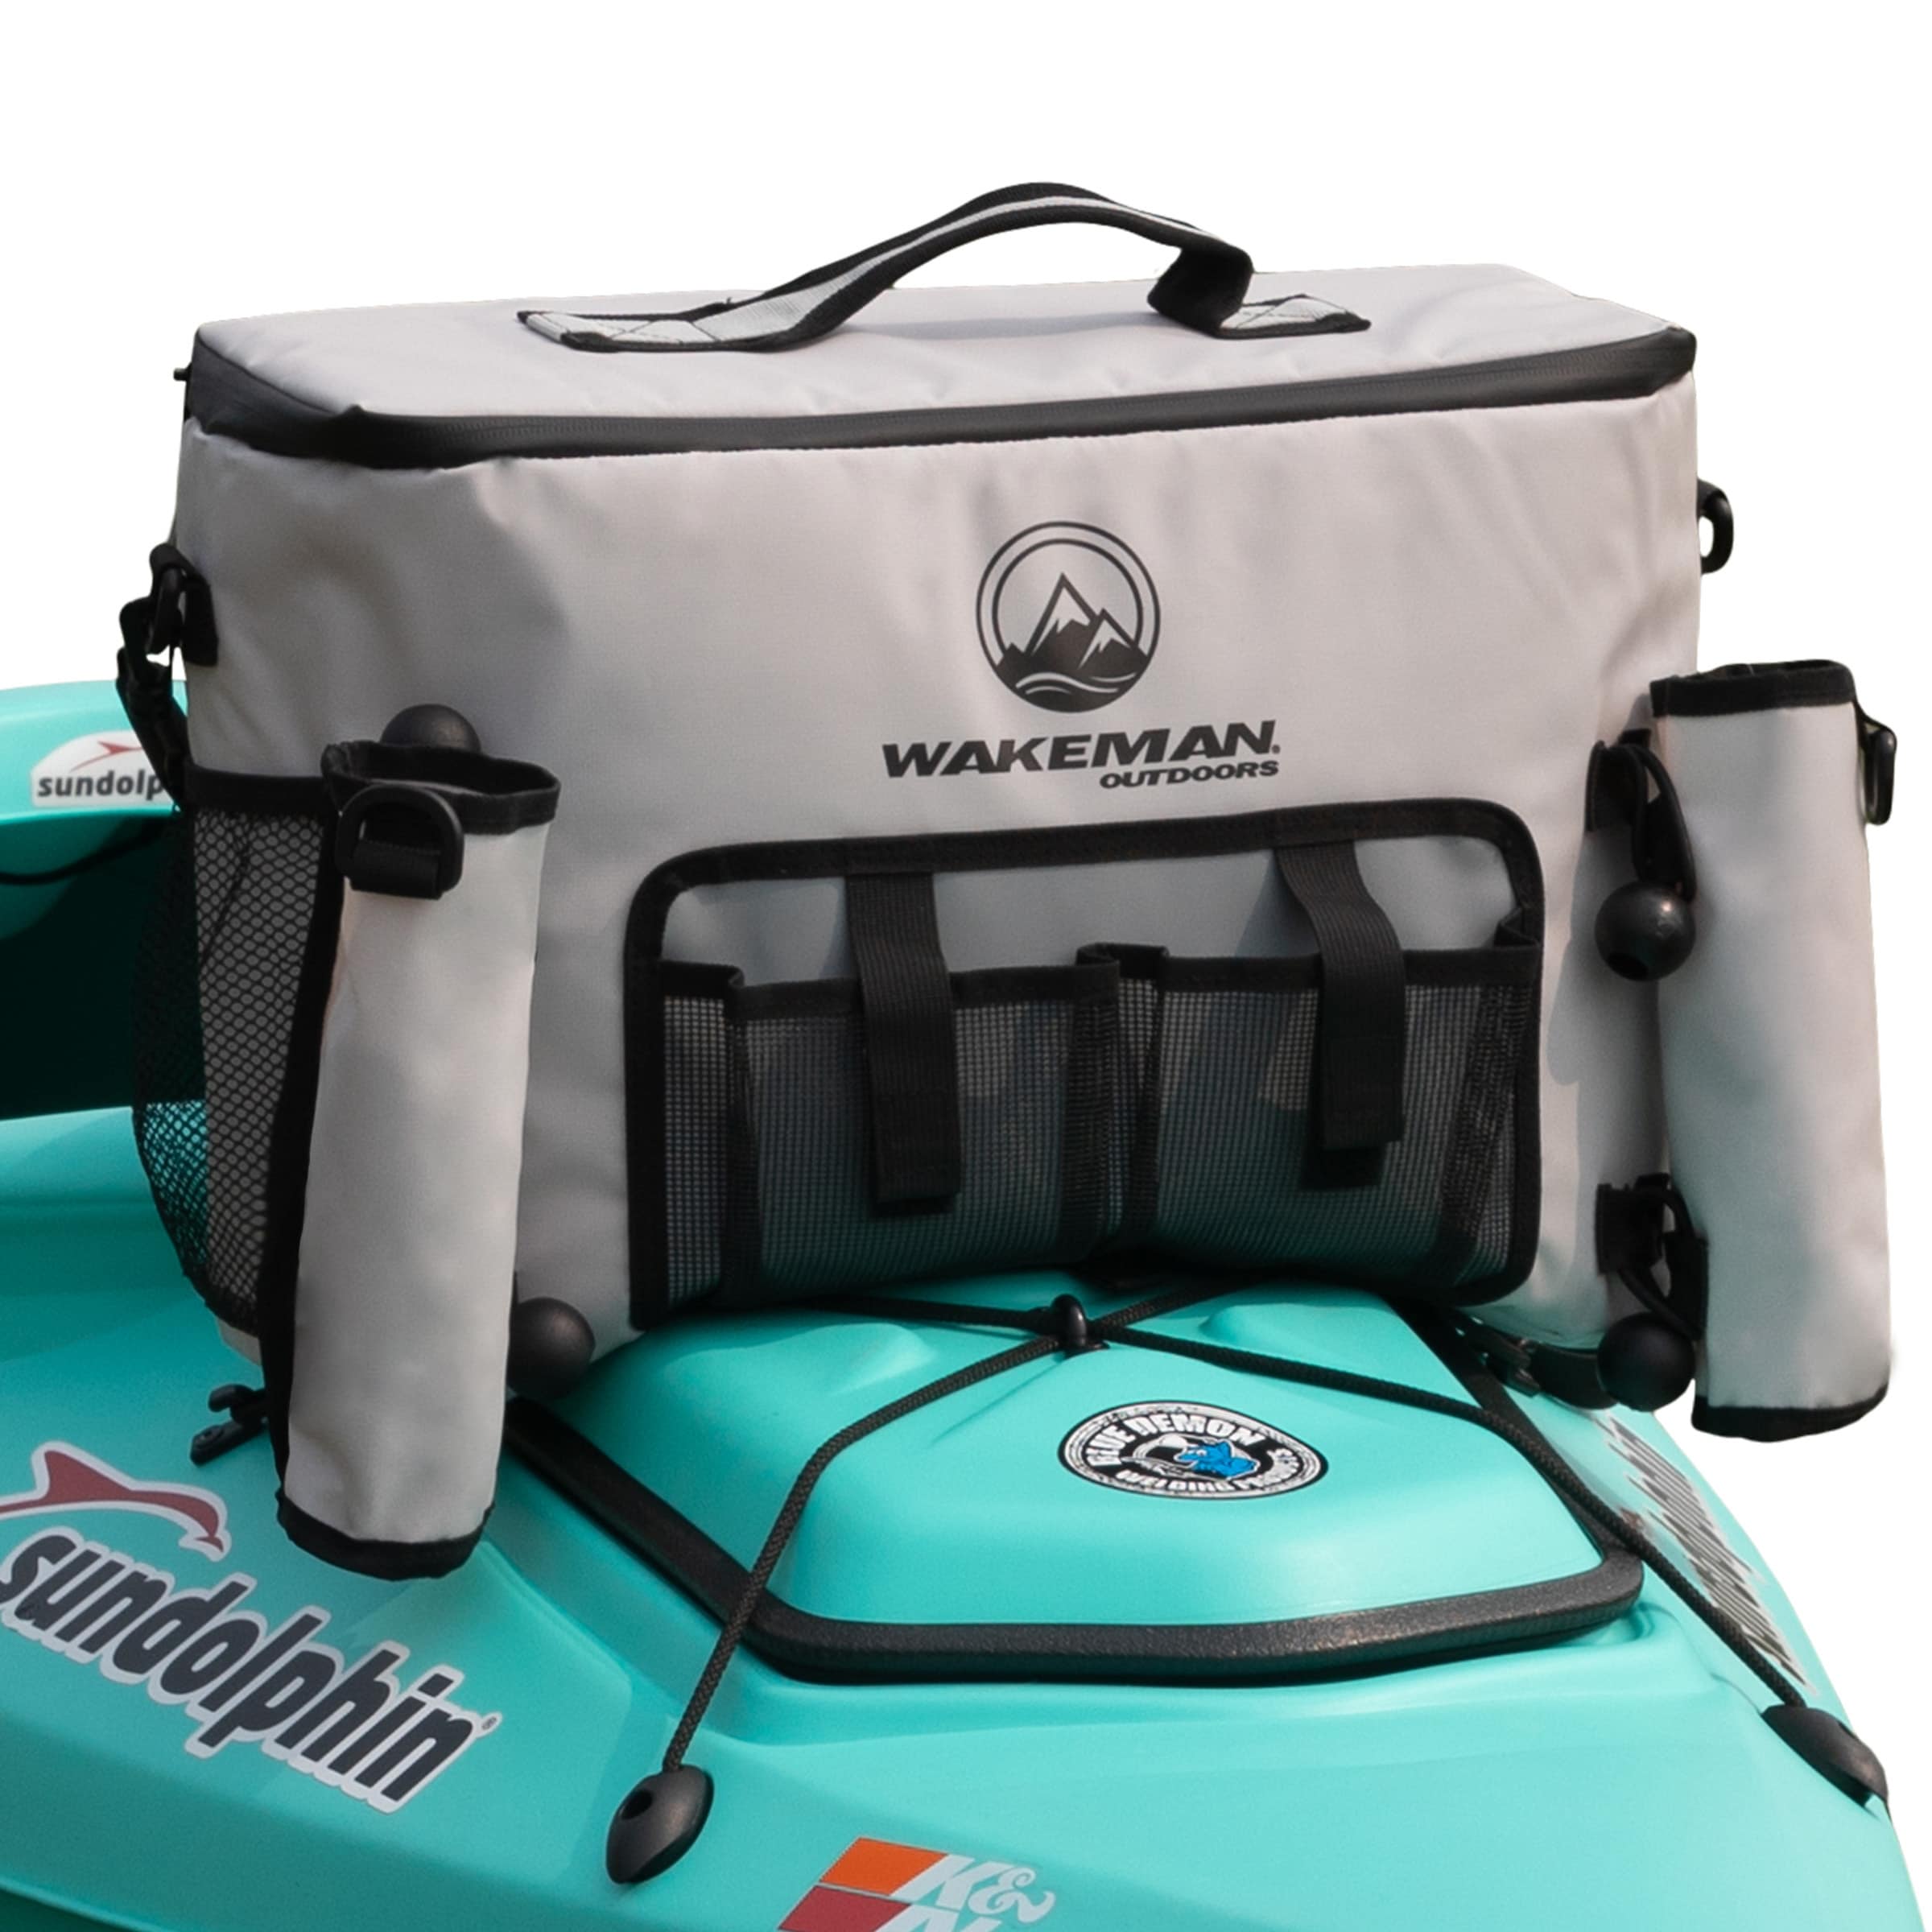 Kayak Cooler - 18L Seat Back Fishing Cooler - Water-Resistant Insulated Bag - 8-12 Hour Cooling Time by Wakeman Outdoors - Green